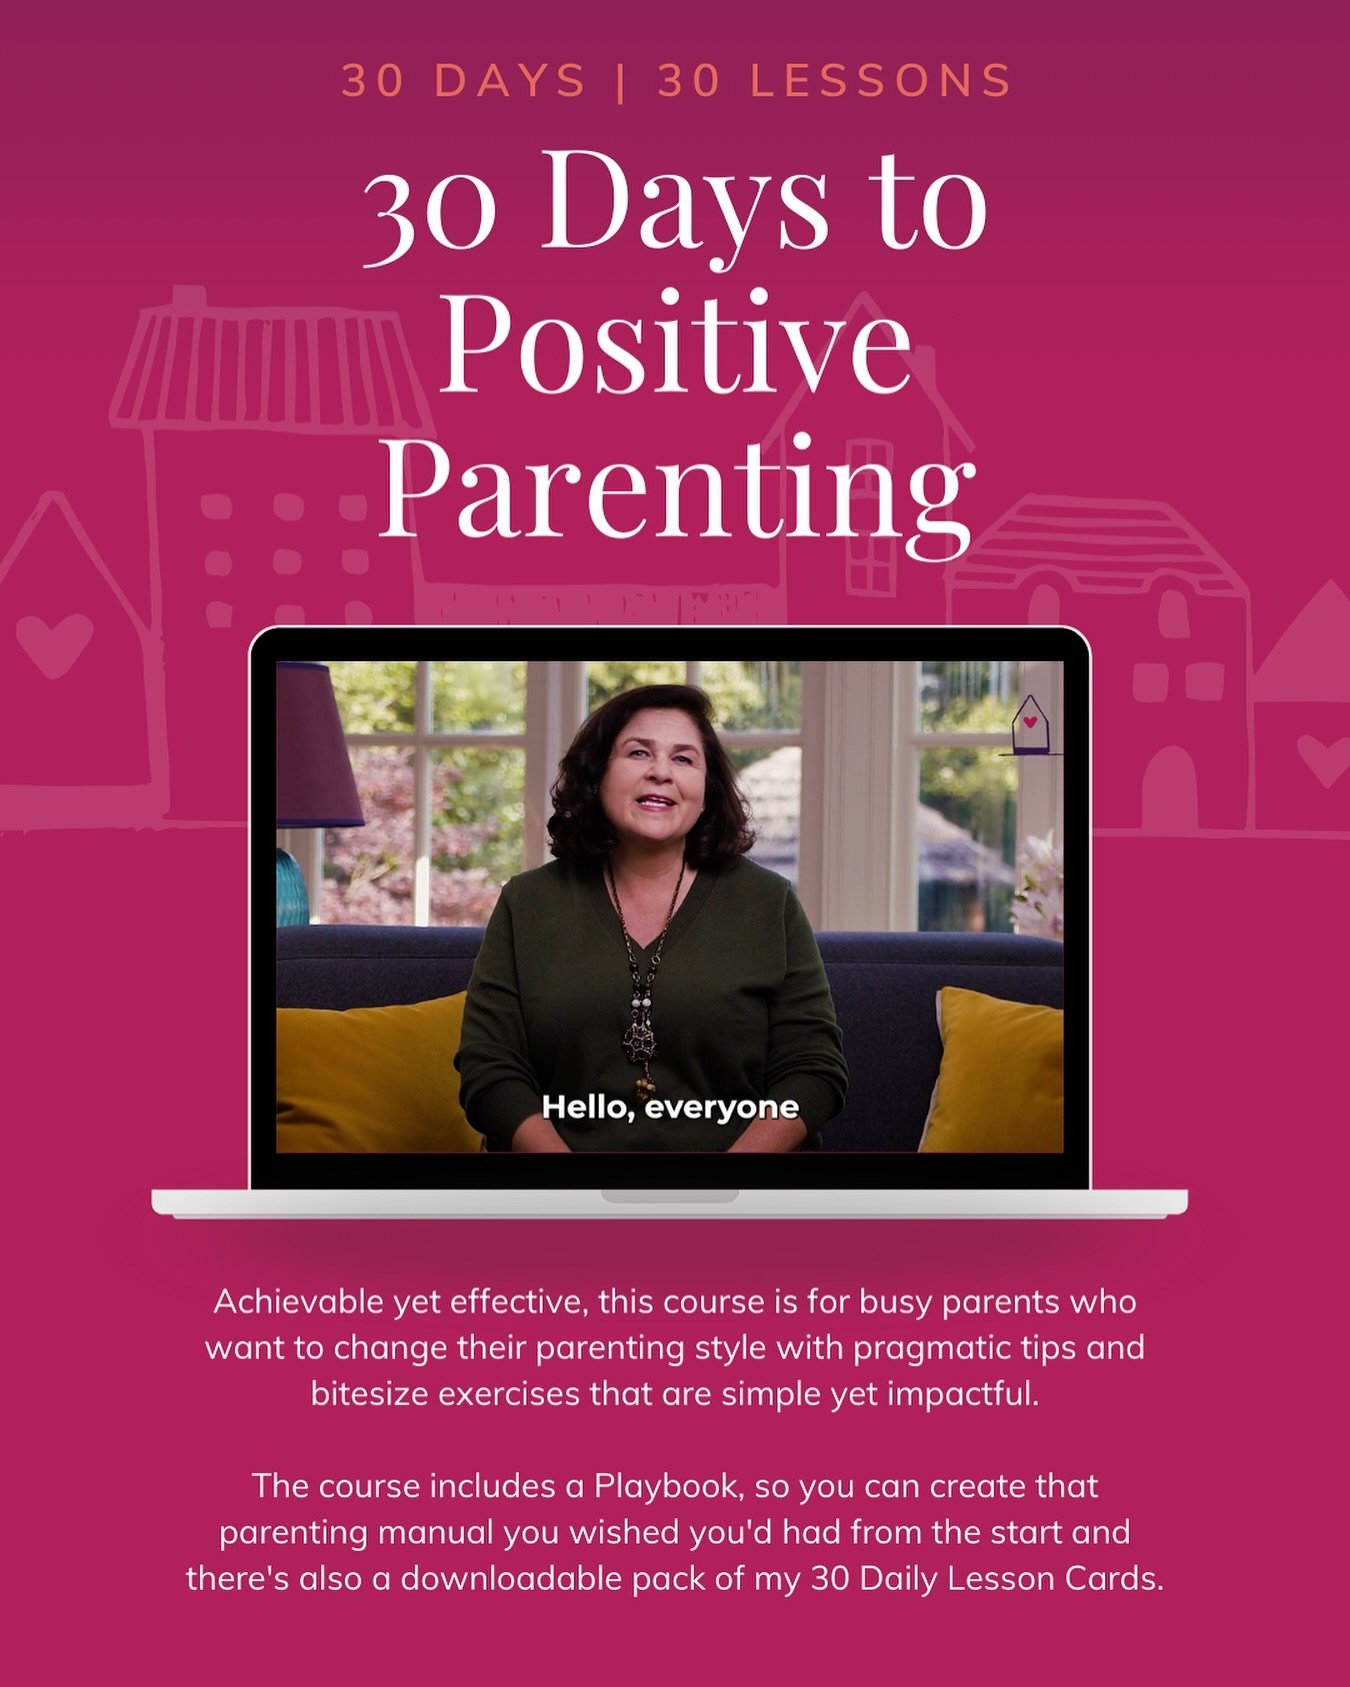 Do you know I have a 30 day parenting programme, teaching you how not to rely on nagging, bribing and shouting. And to nurture more cooperative, confident and HAPPIER children.

So whether you&rsquo;re a stay at home mum or dad, a working parent or a